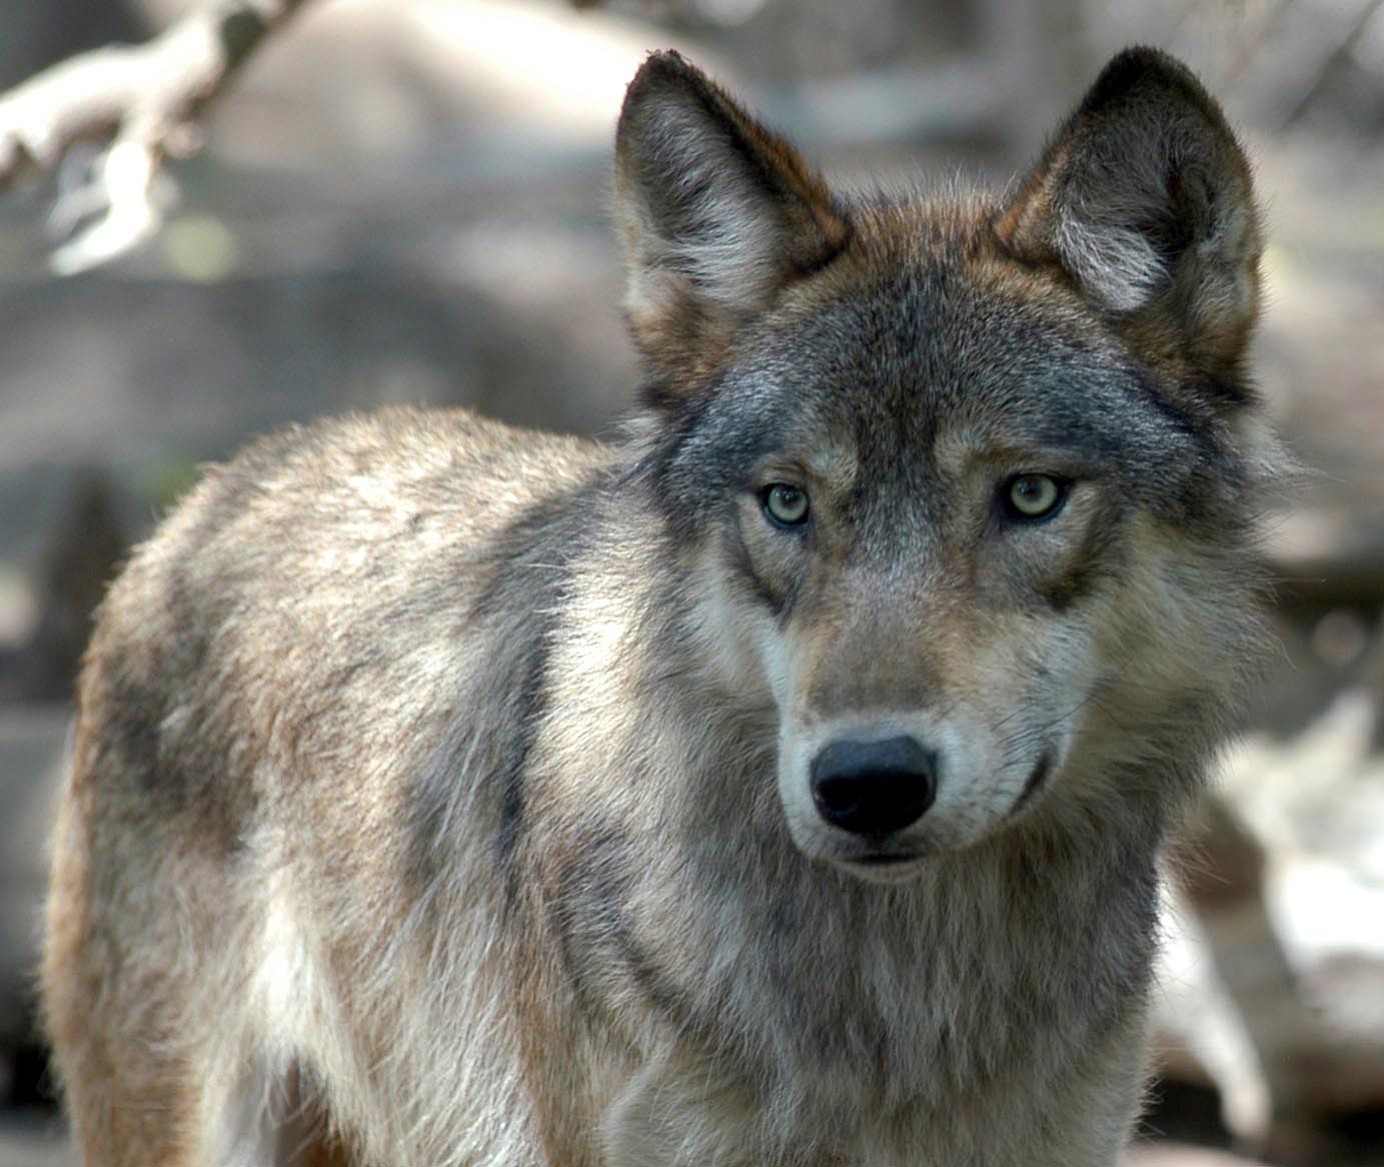 A new study finds that killing wolves does not necessarily reduce attacks on livestock.